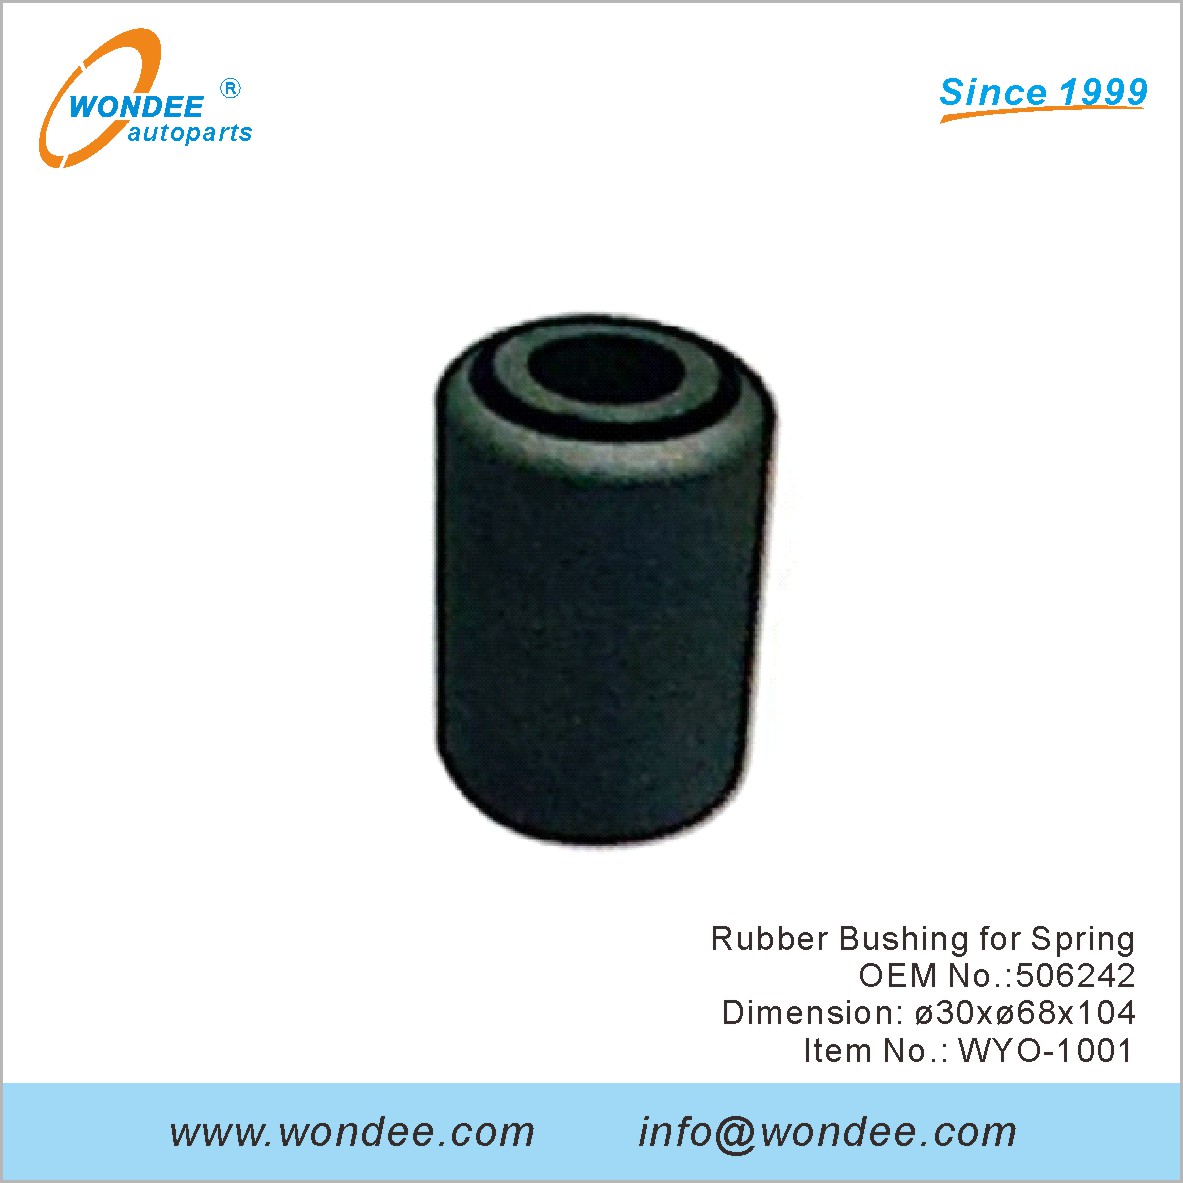 Rubber Bushing for Spring OEM 506242 for Volvo from WONDEE